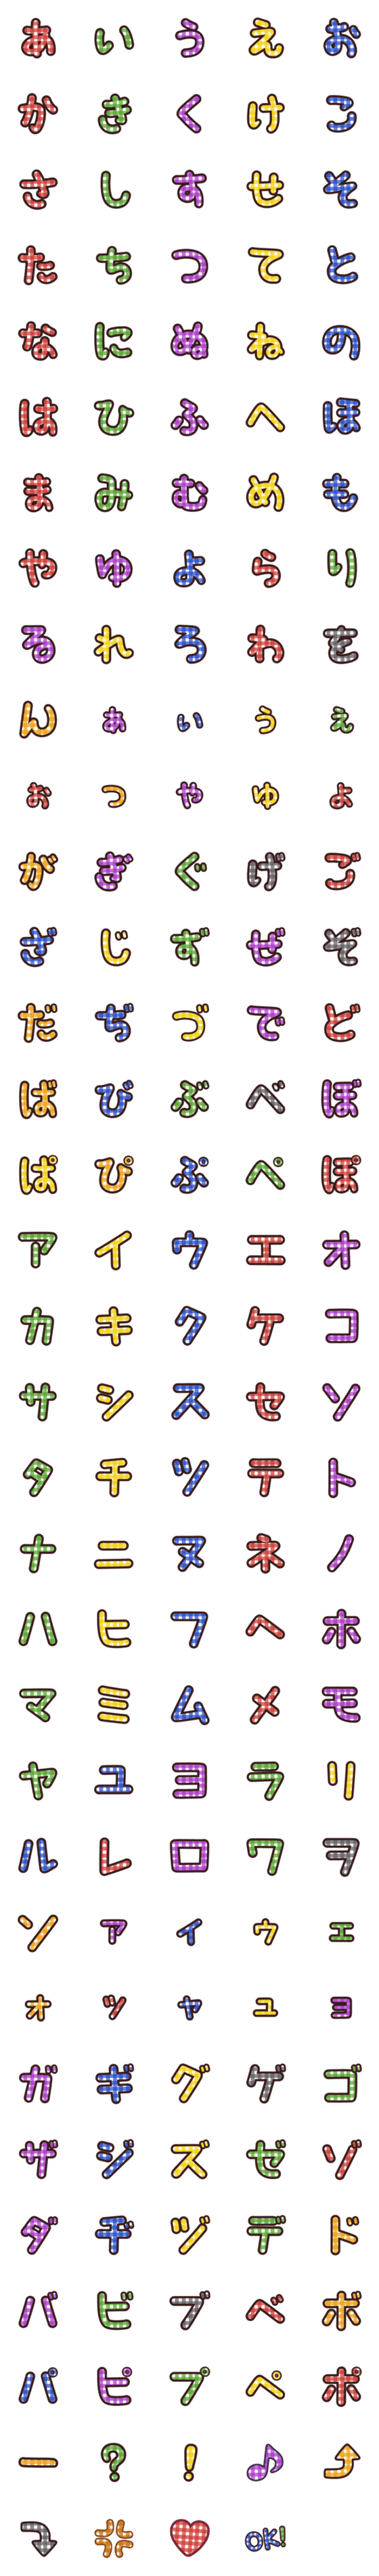 [LINE絵文字]ギンガムデコ文字の画像一覧